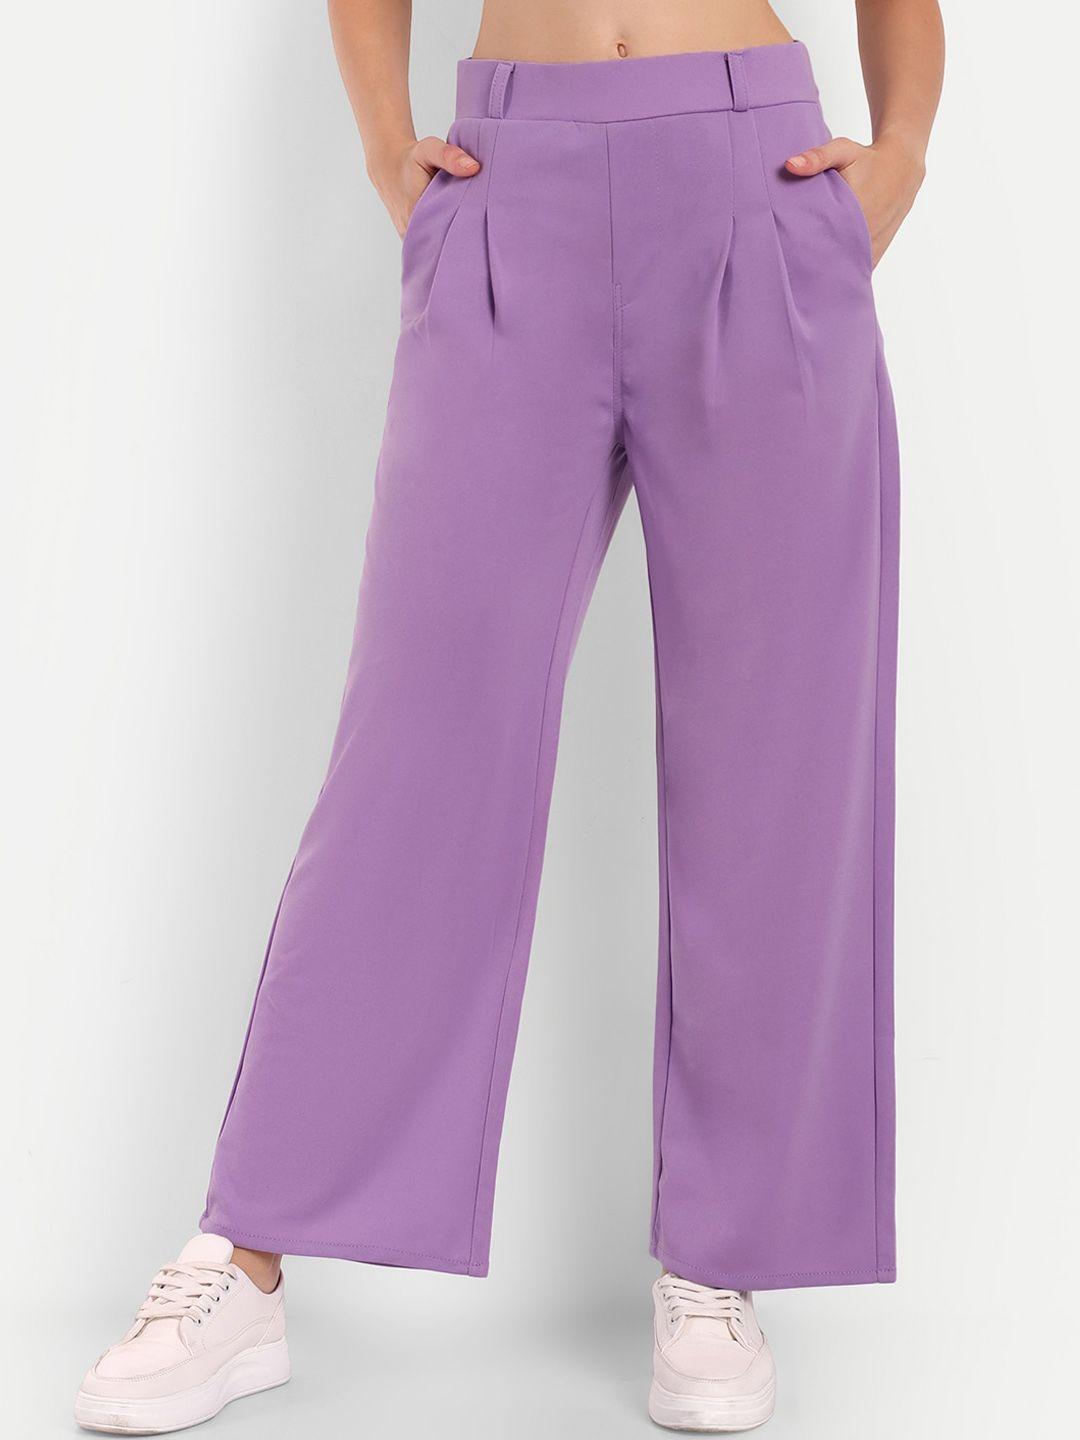 next-one-women-lavender-smart-loose-fit-high-rise-easy-wash-pleated-trousers